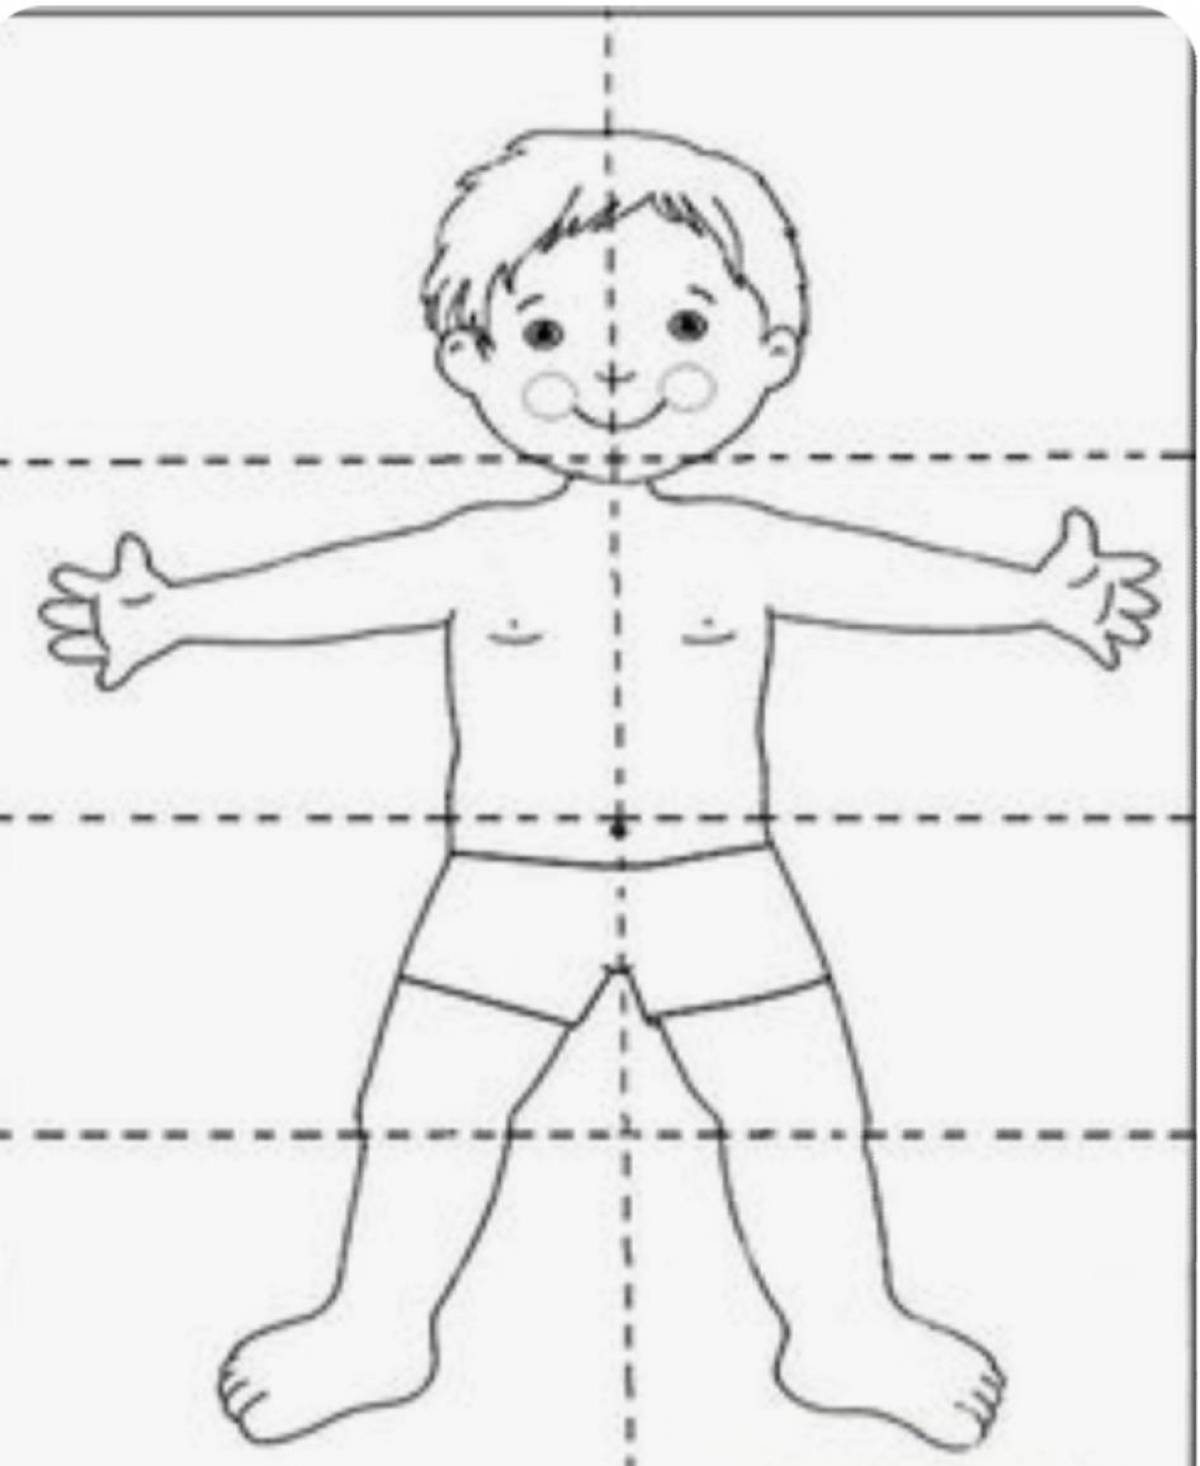 Stimulating body parts coloring for kids